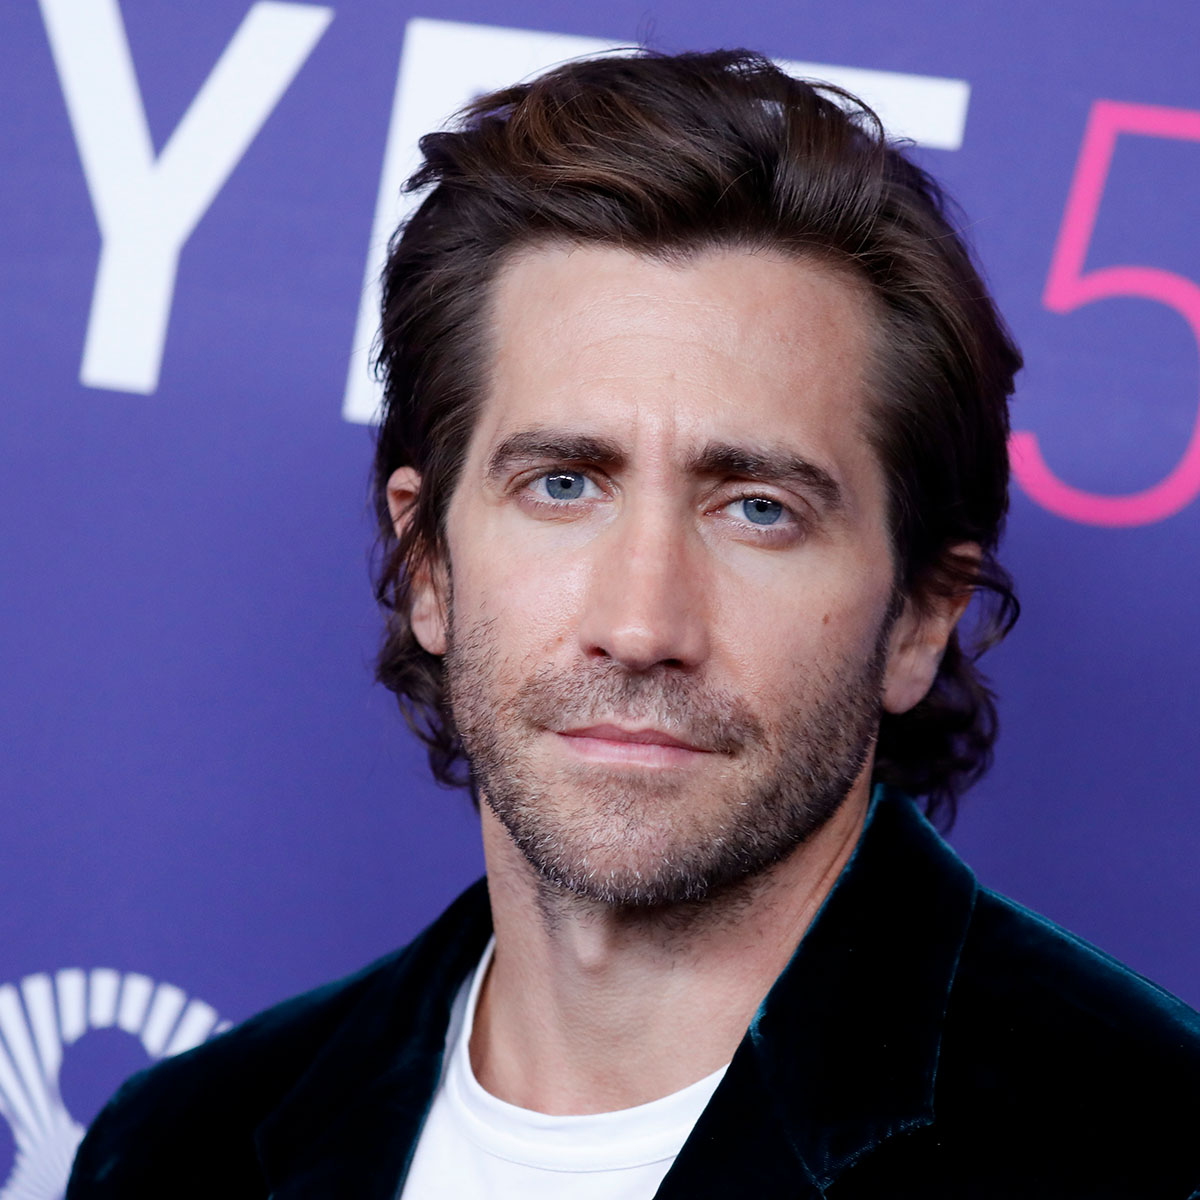 jake-gyllenhaal-mid-length-swept-back-hairstyle-mens-hairstyles-man-for-himself-ft